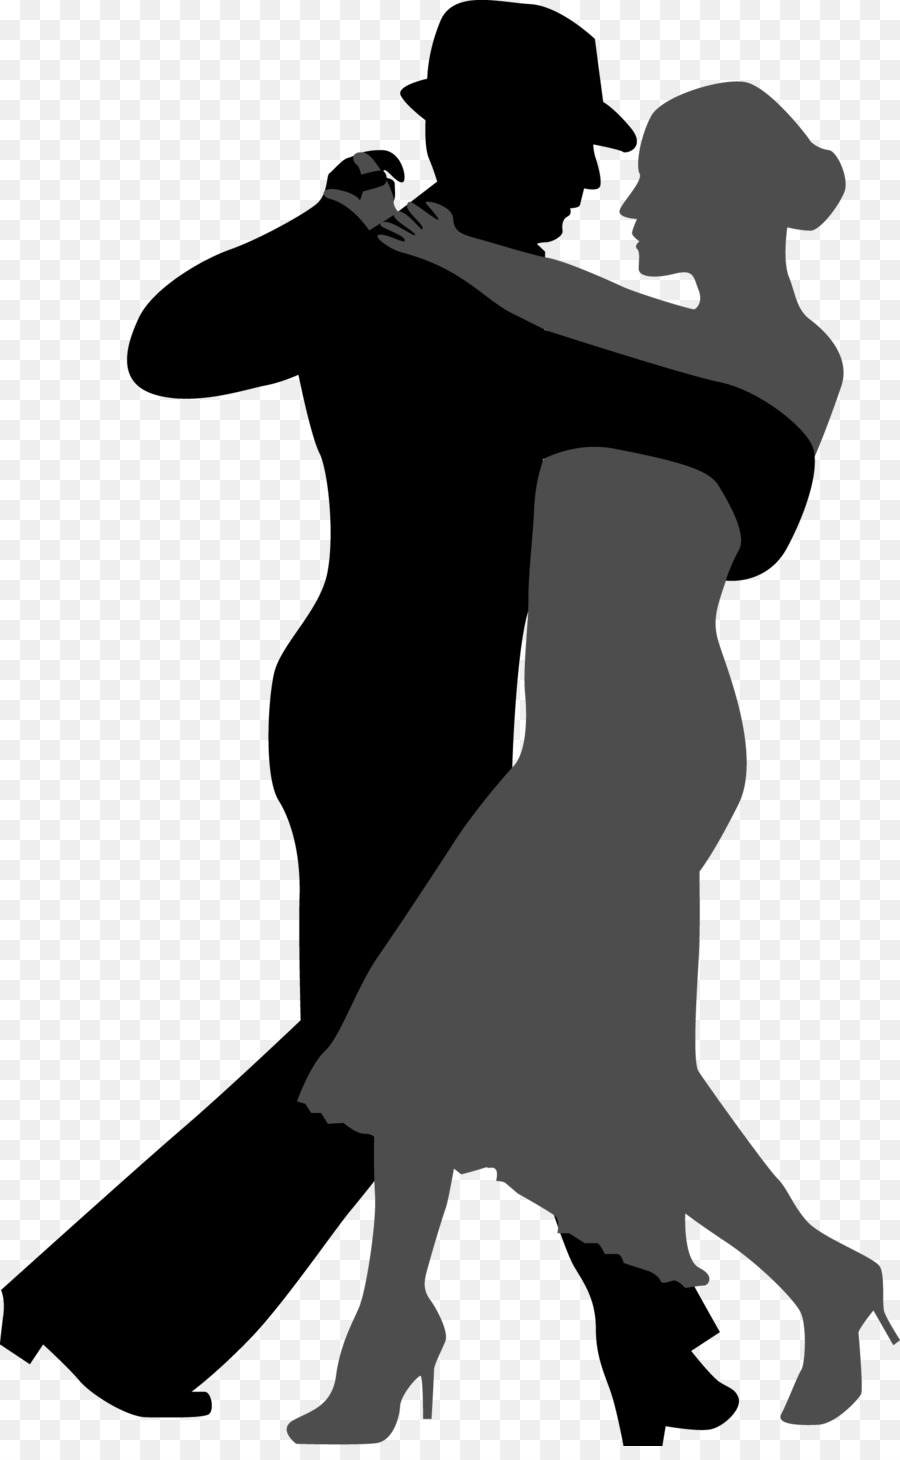 Tango Ballroom dance Silhouette - Two dancers png download - 1581*2540 - Free Transparent Tango png Download.